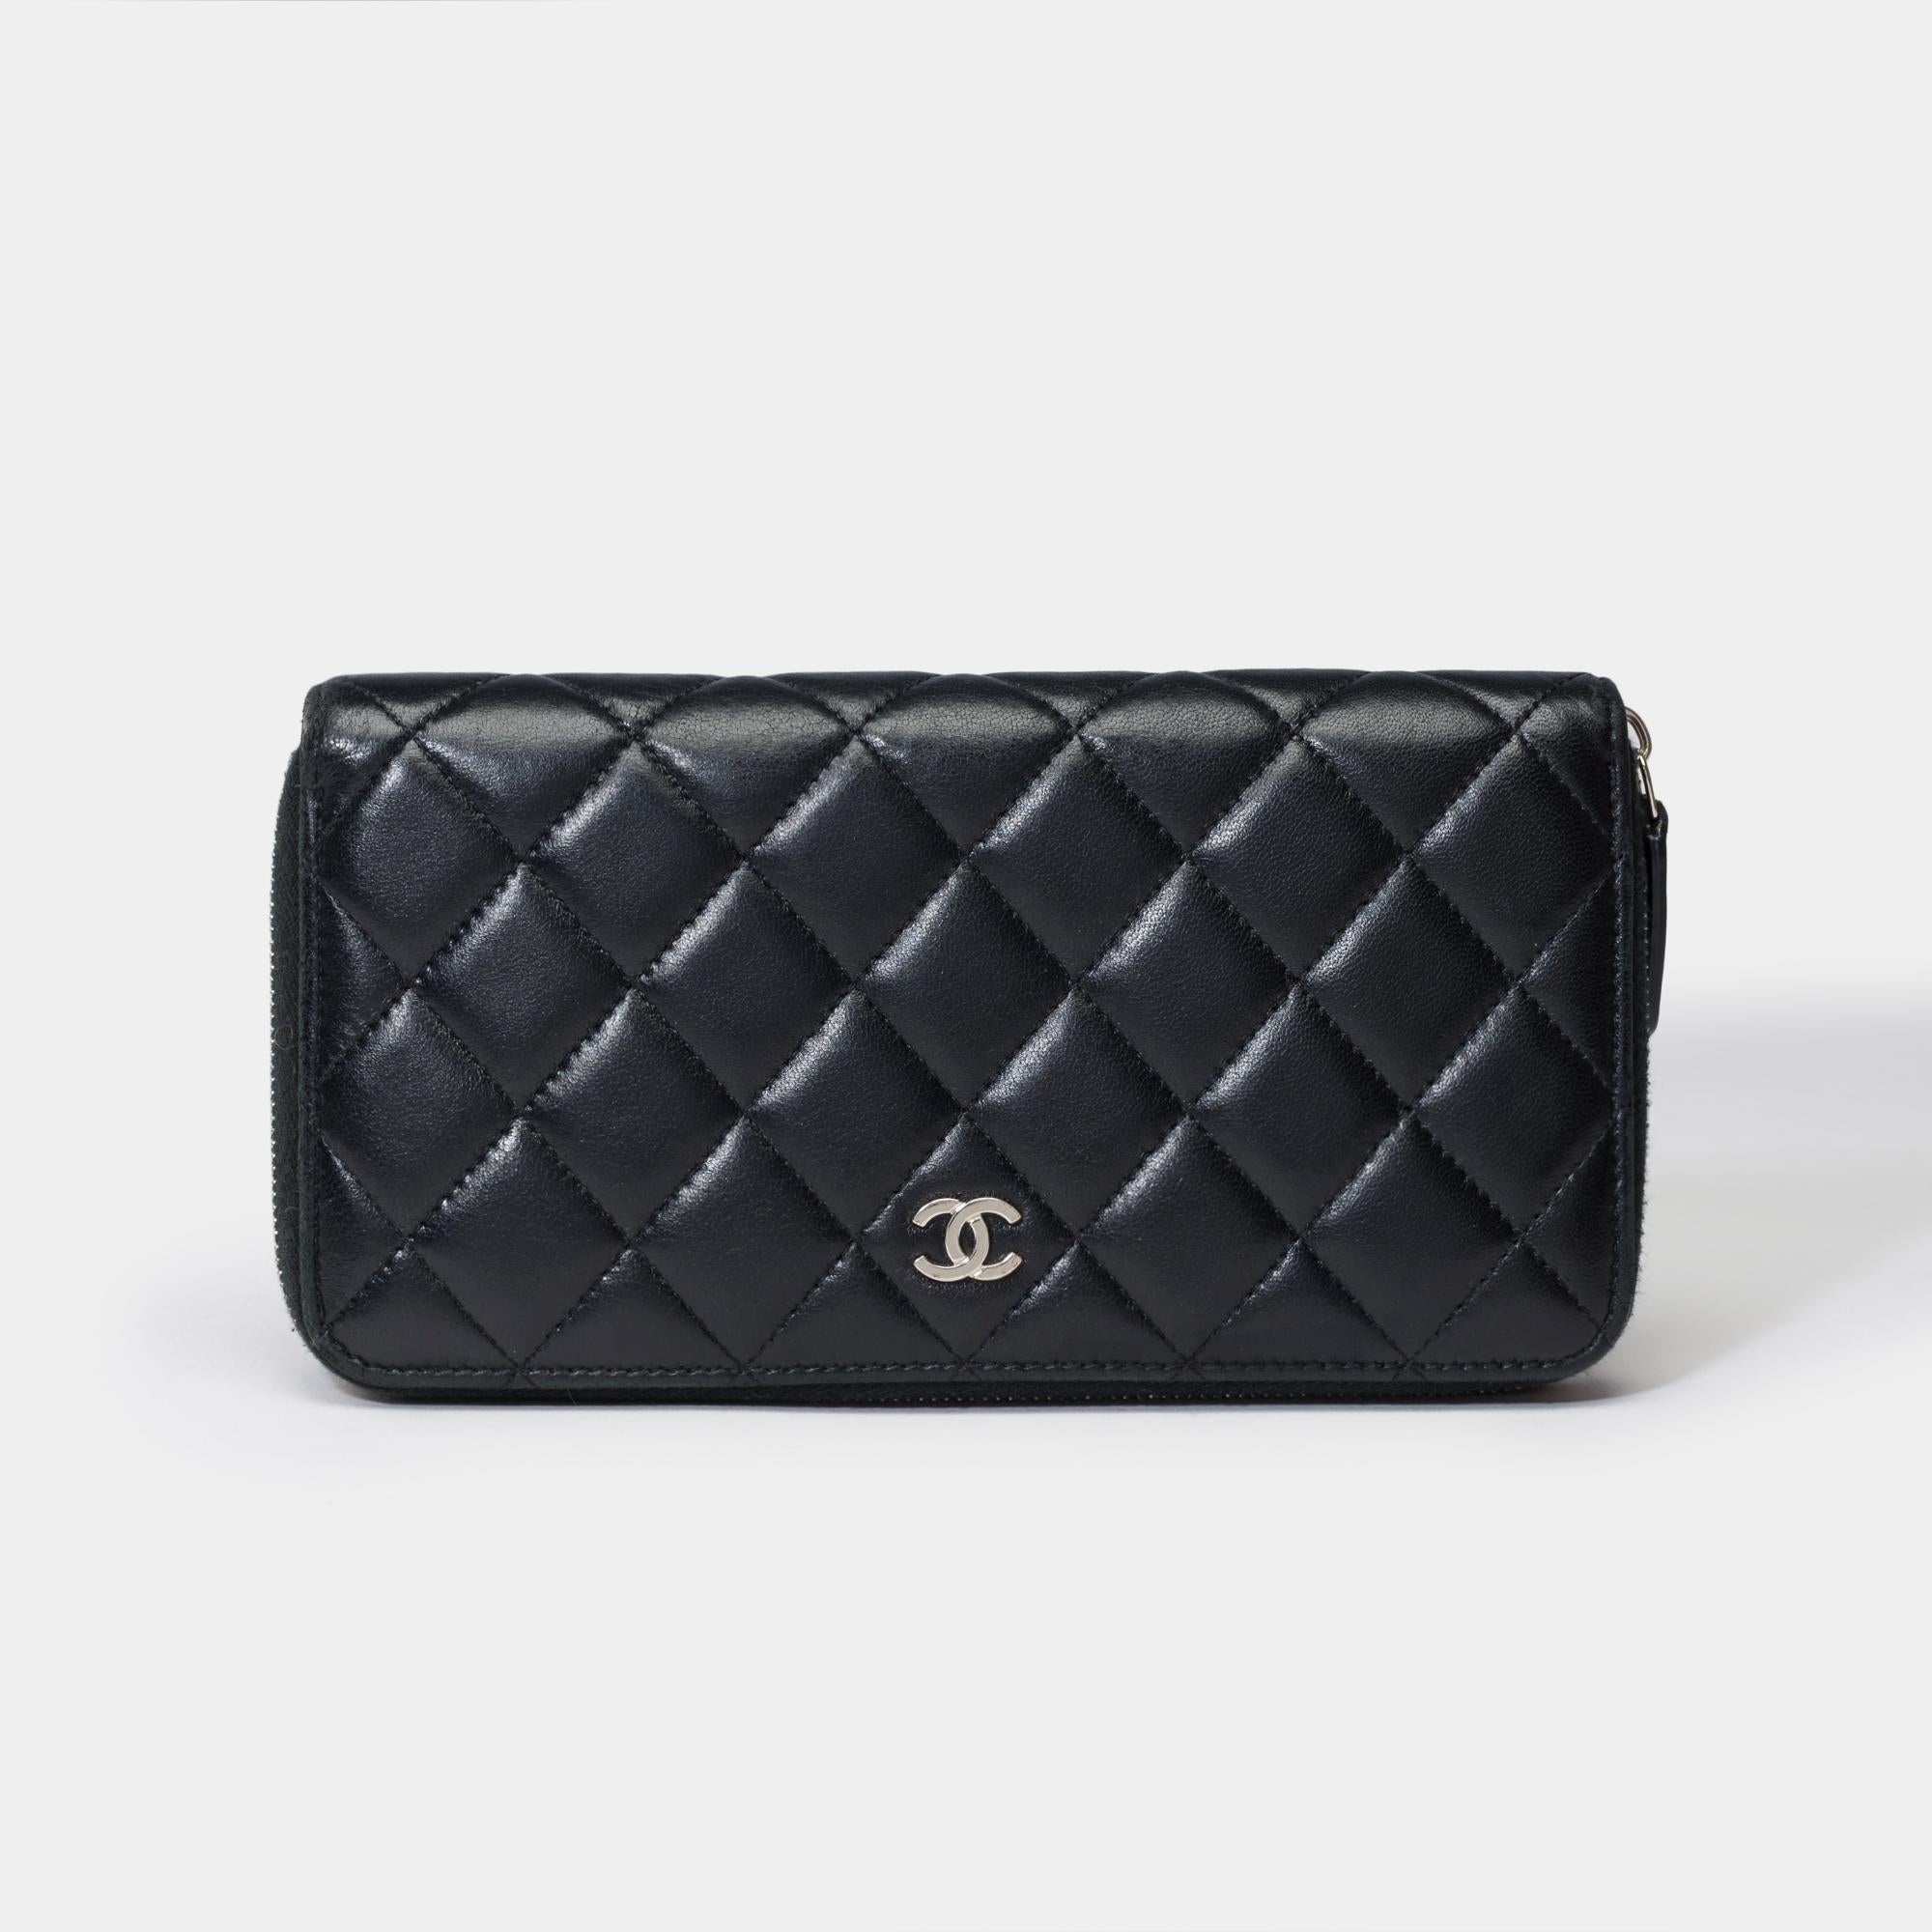 Lovely​ ​Chanel​ ​Wallet​ ​Compagnon​ ​in​ ​black​ ​quilted​ ​lambskin​ ​leather,​ ​silver​ ​metal​ ​trim​ ​for​ ​a​ ​hand​ ​carry

A​ ​patch​ ​pocket​ ​on​ ​the​ ​back​ ​of​ ​the​ ​bag
Zip​ ​closure,​ ​​ ​​ ​silver​ ​CC​ ​logo​ ​clasp
A​ ​patch​